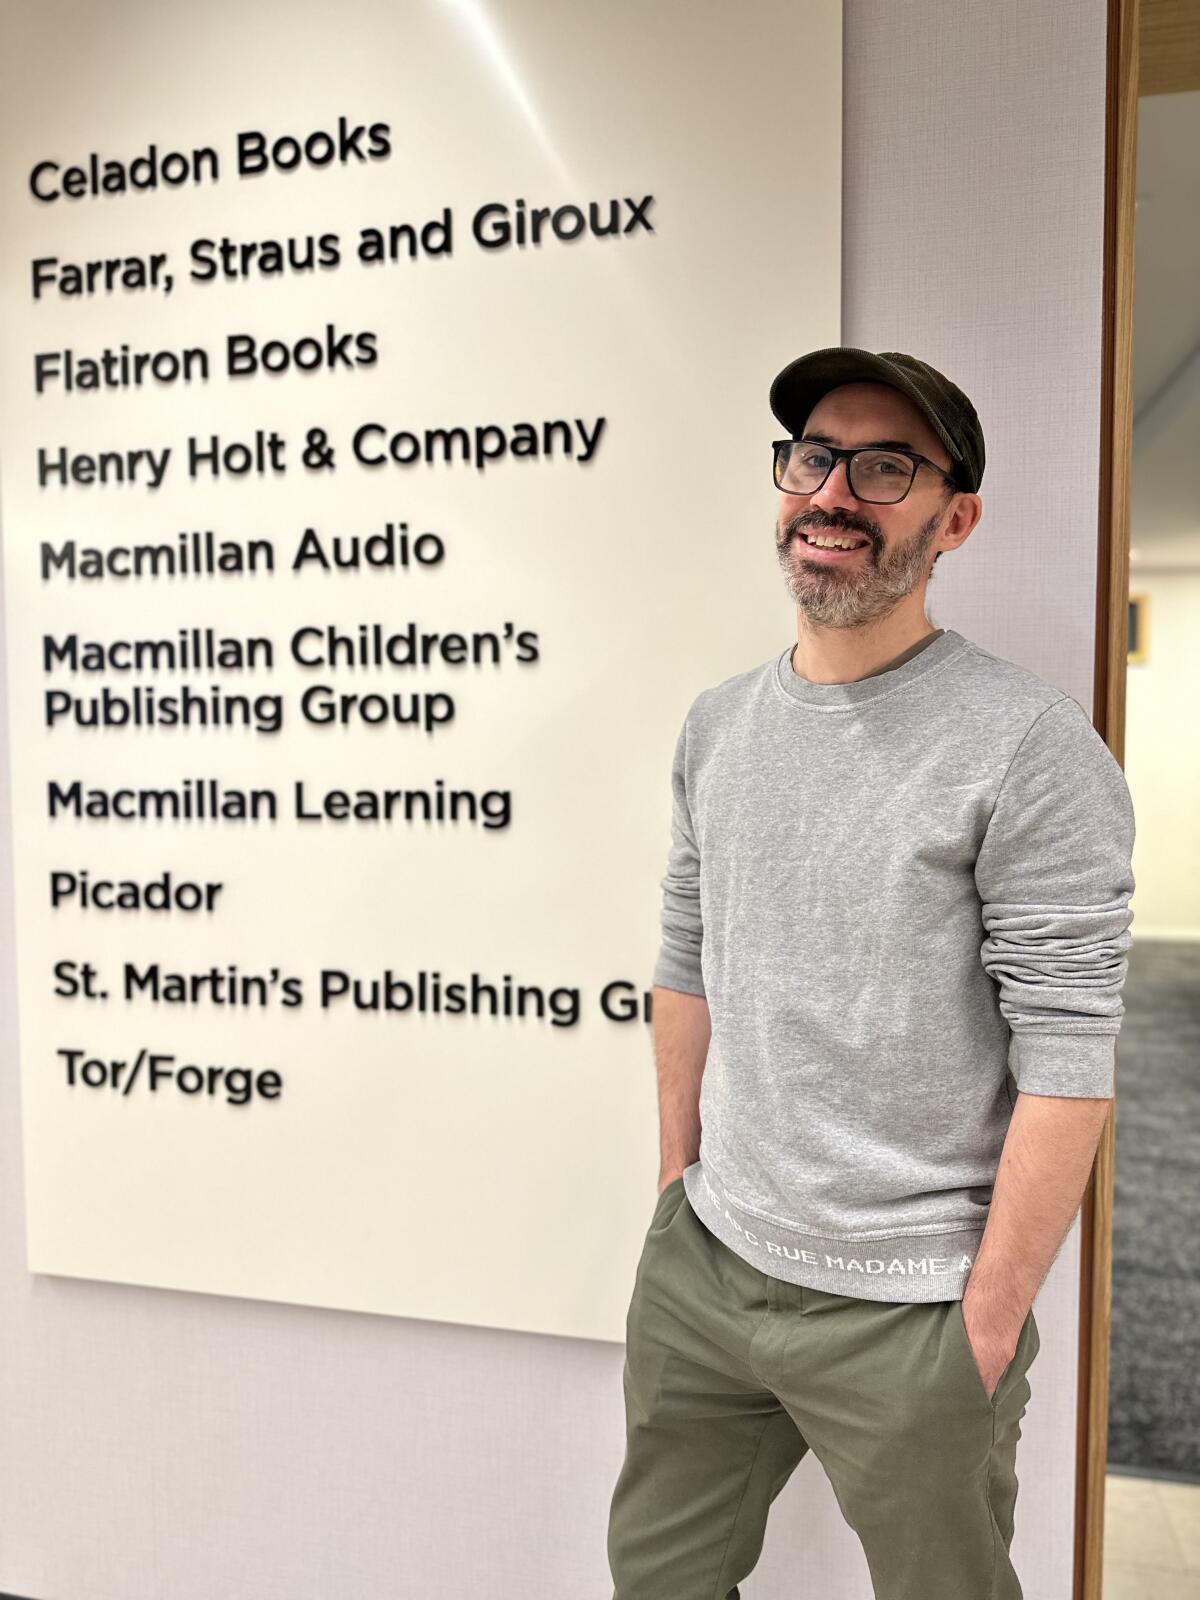 A man in a cap and grew sweater standing in front of a board listing the imprints of Macmillan Publishing.